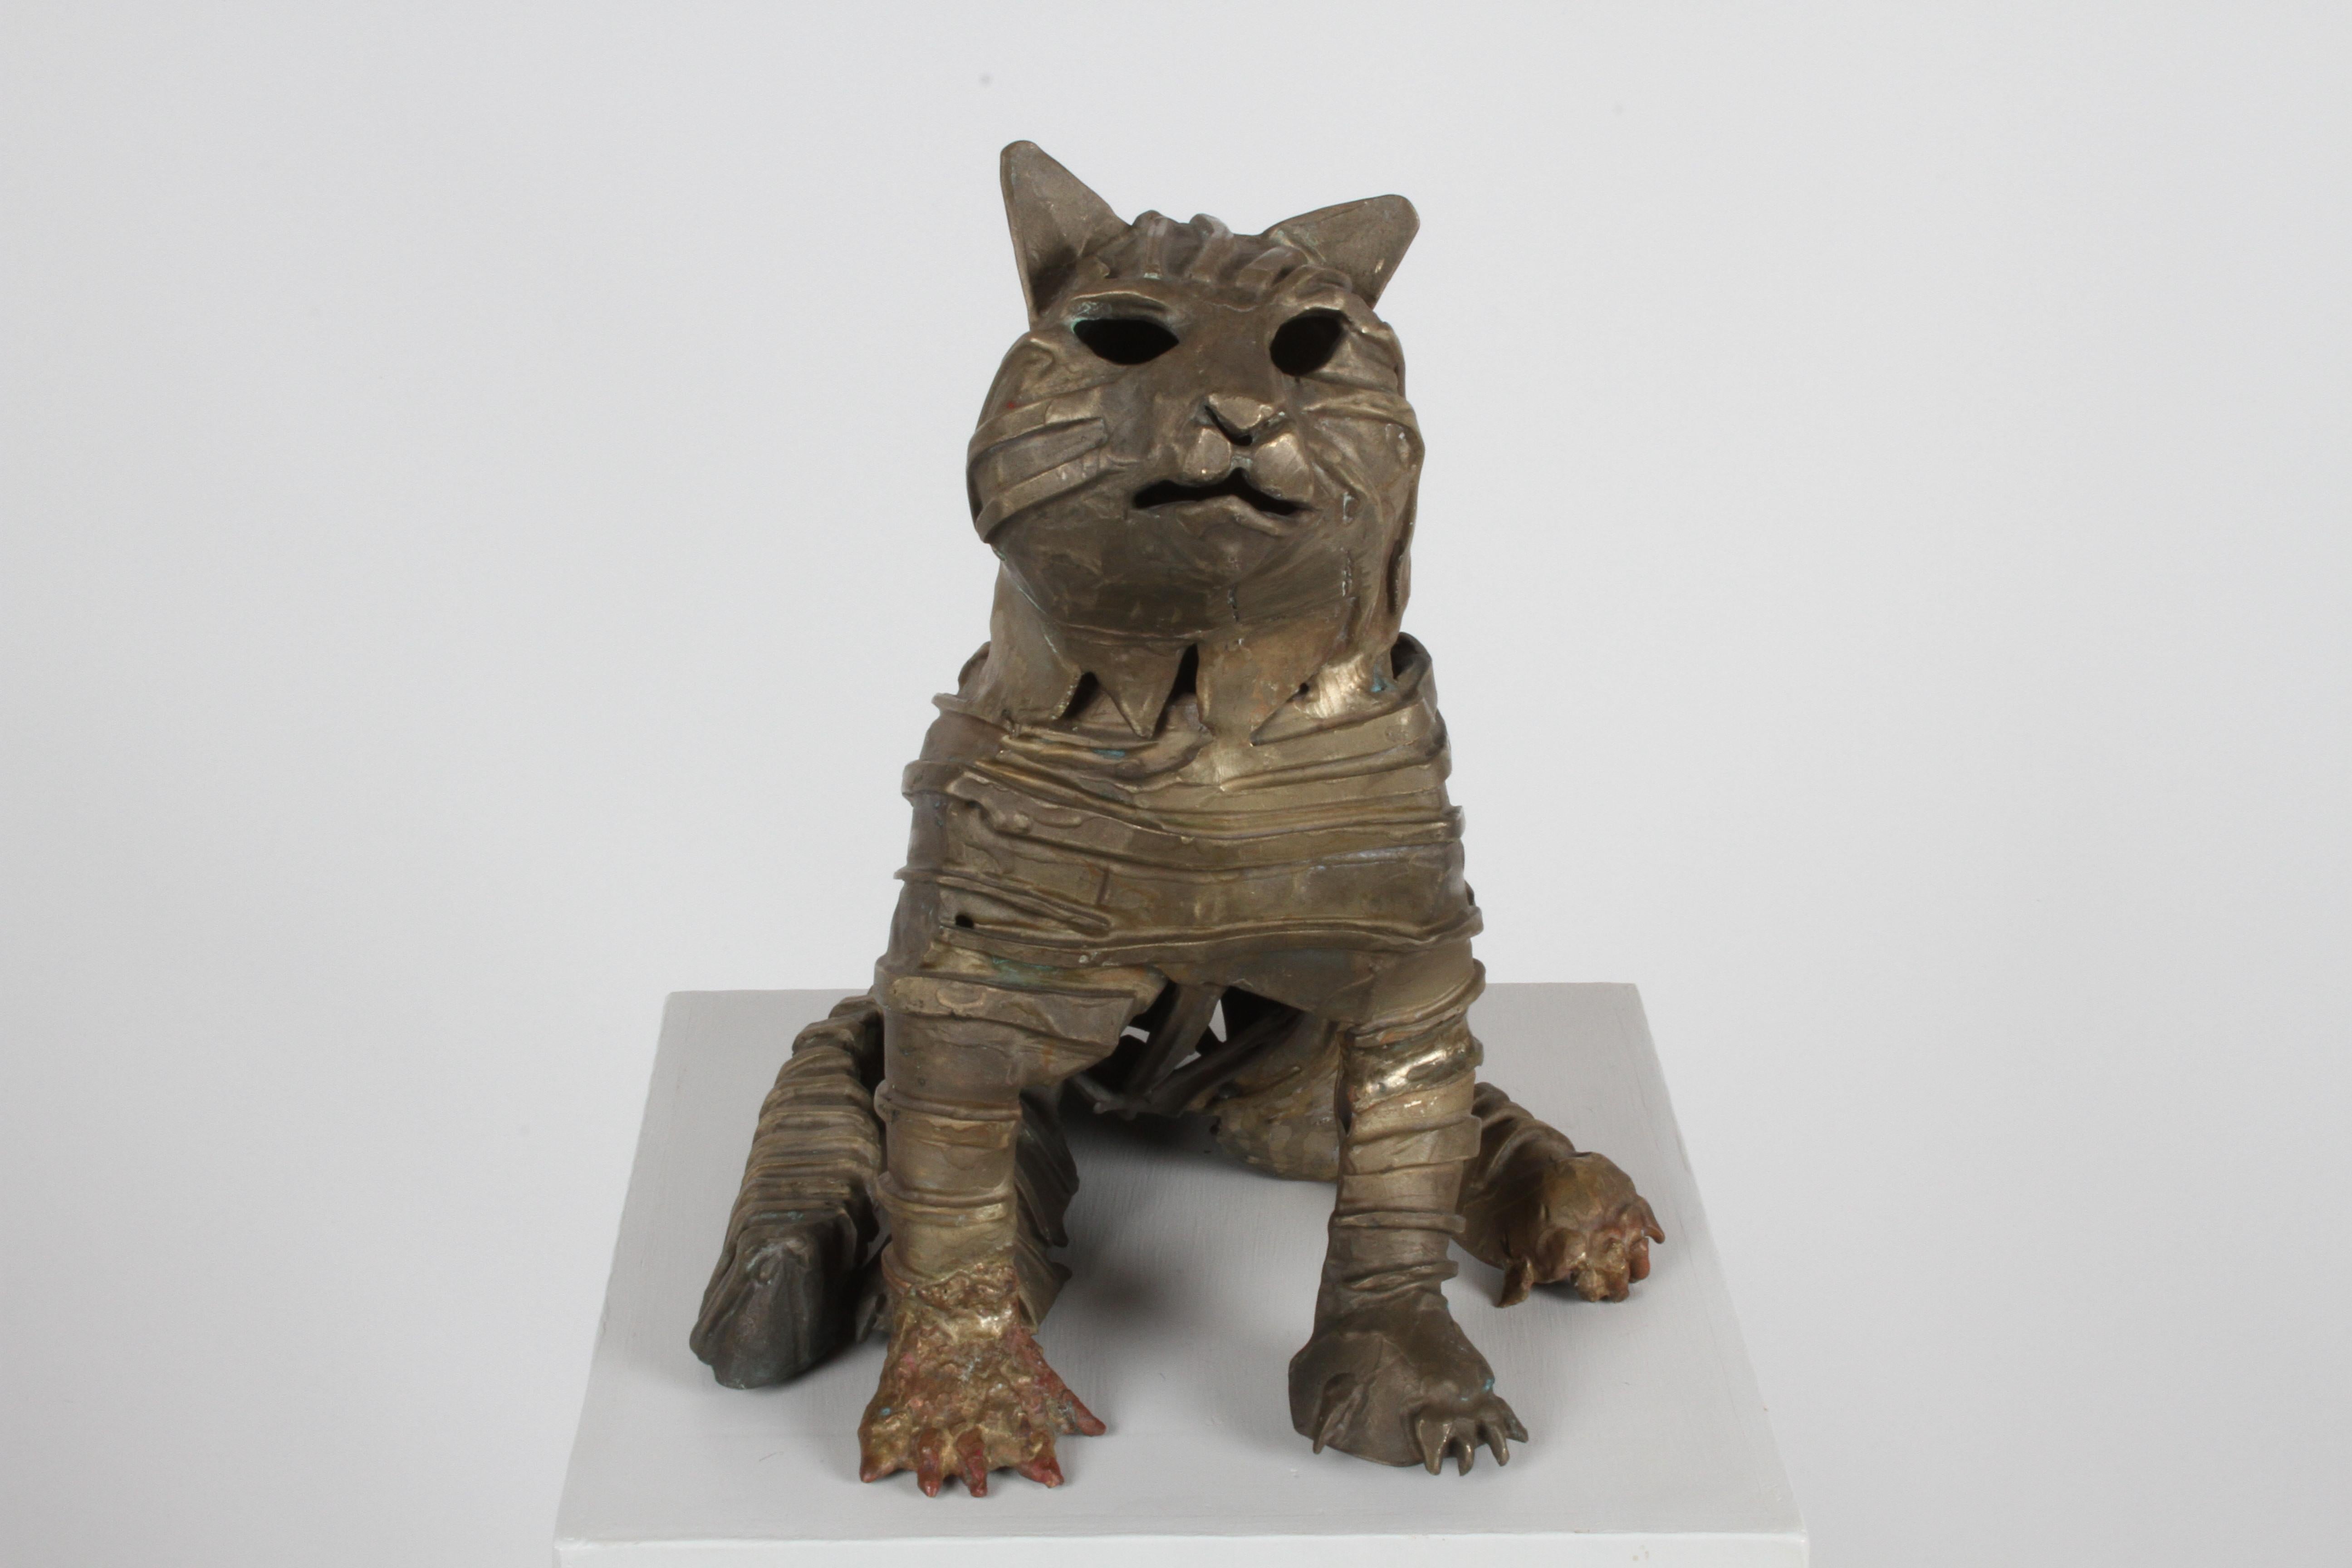 Unique cast and welded bronze brutalist sculpture of a cat in the style of a mummy. Having cast bronze gause wrapping around body with welded detail to front paw, in the style of British artist Jane Ackroyd (born 1957). Unsigned.